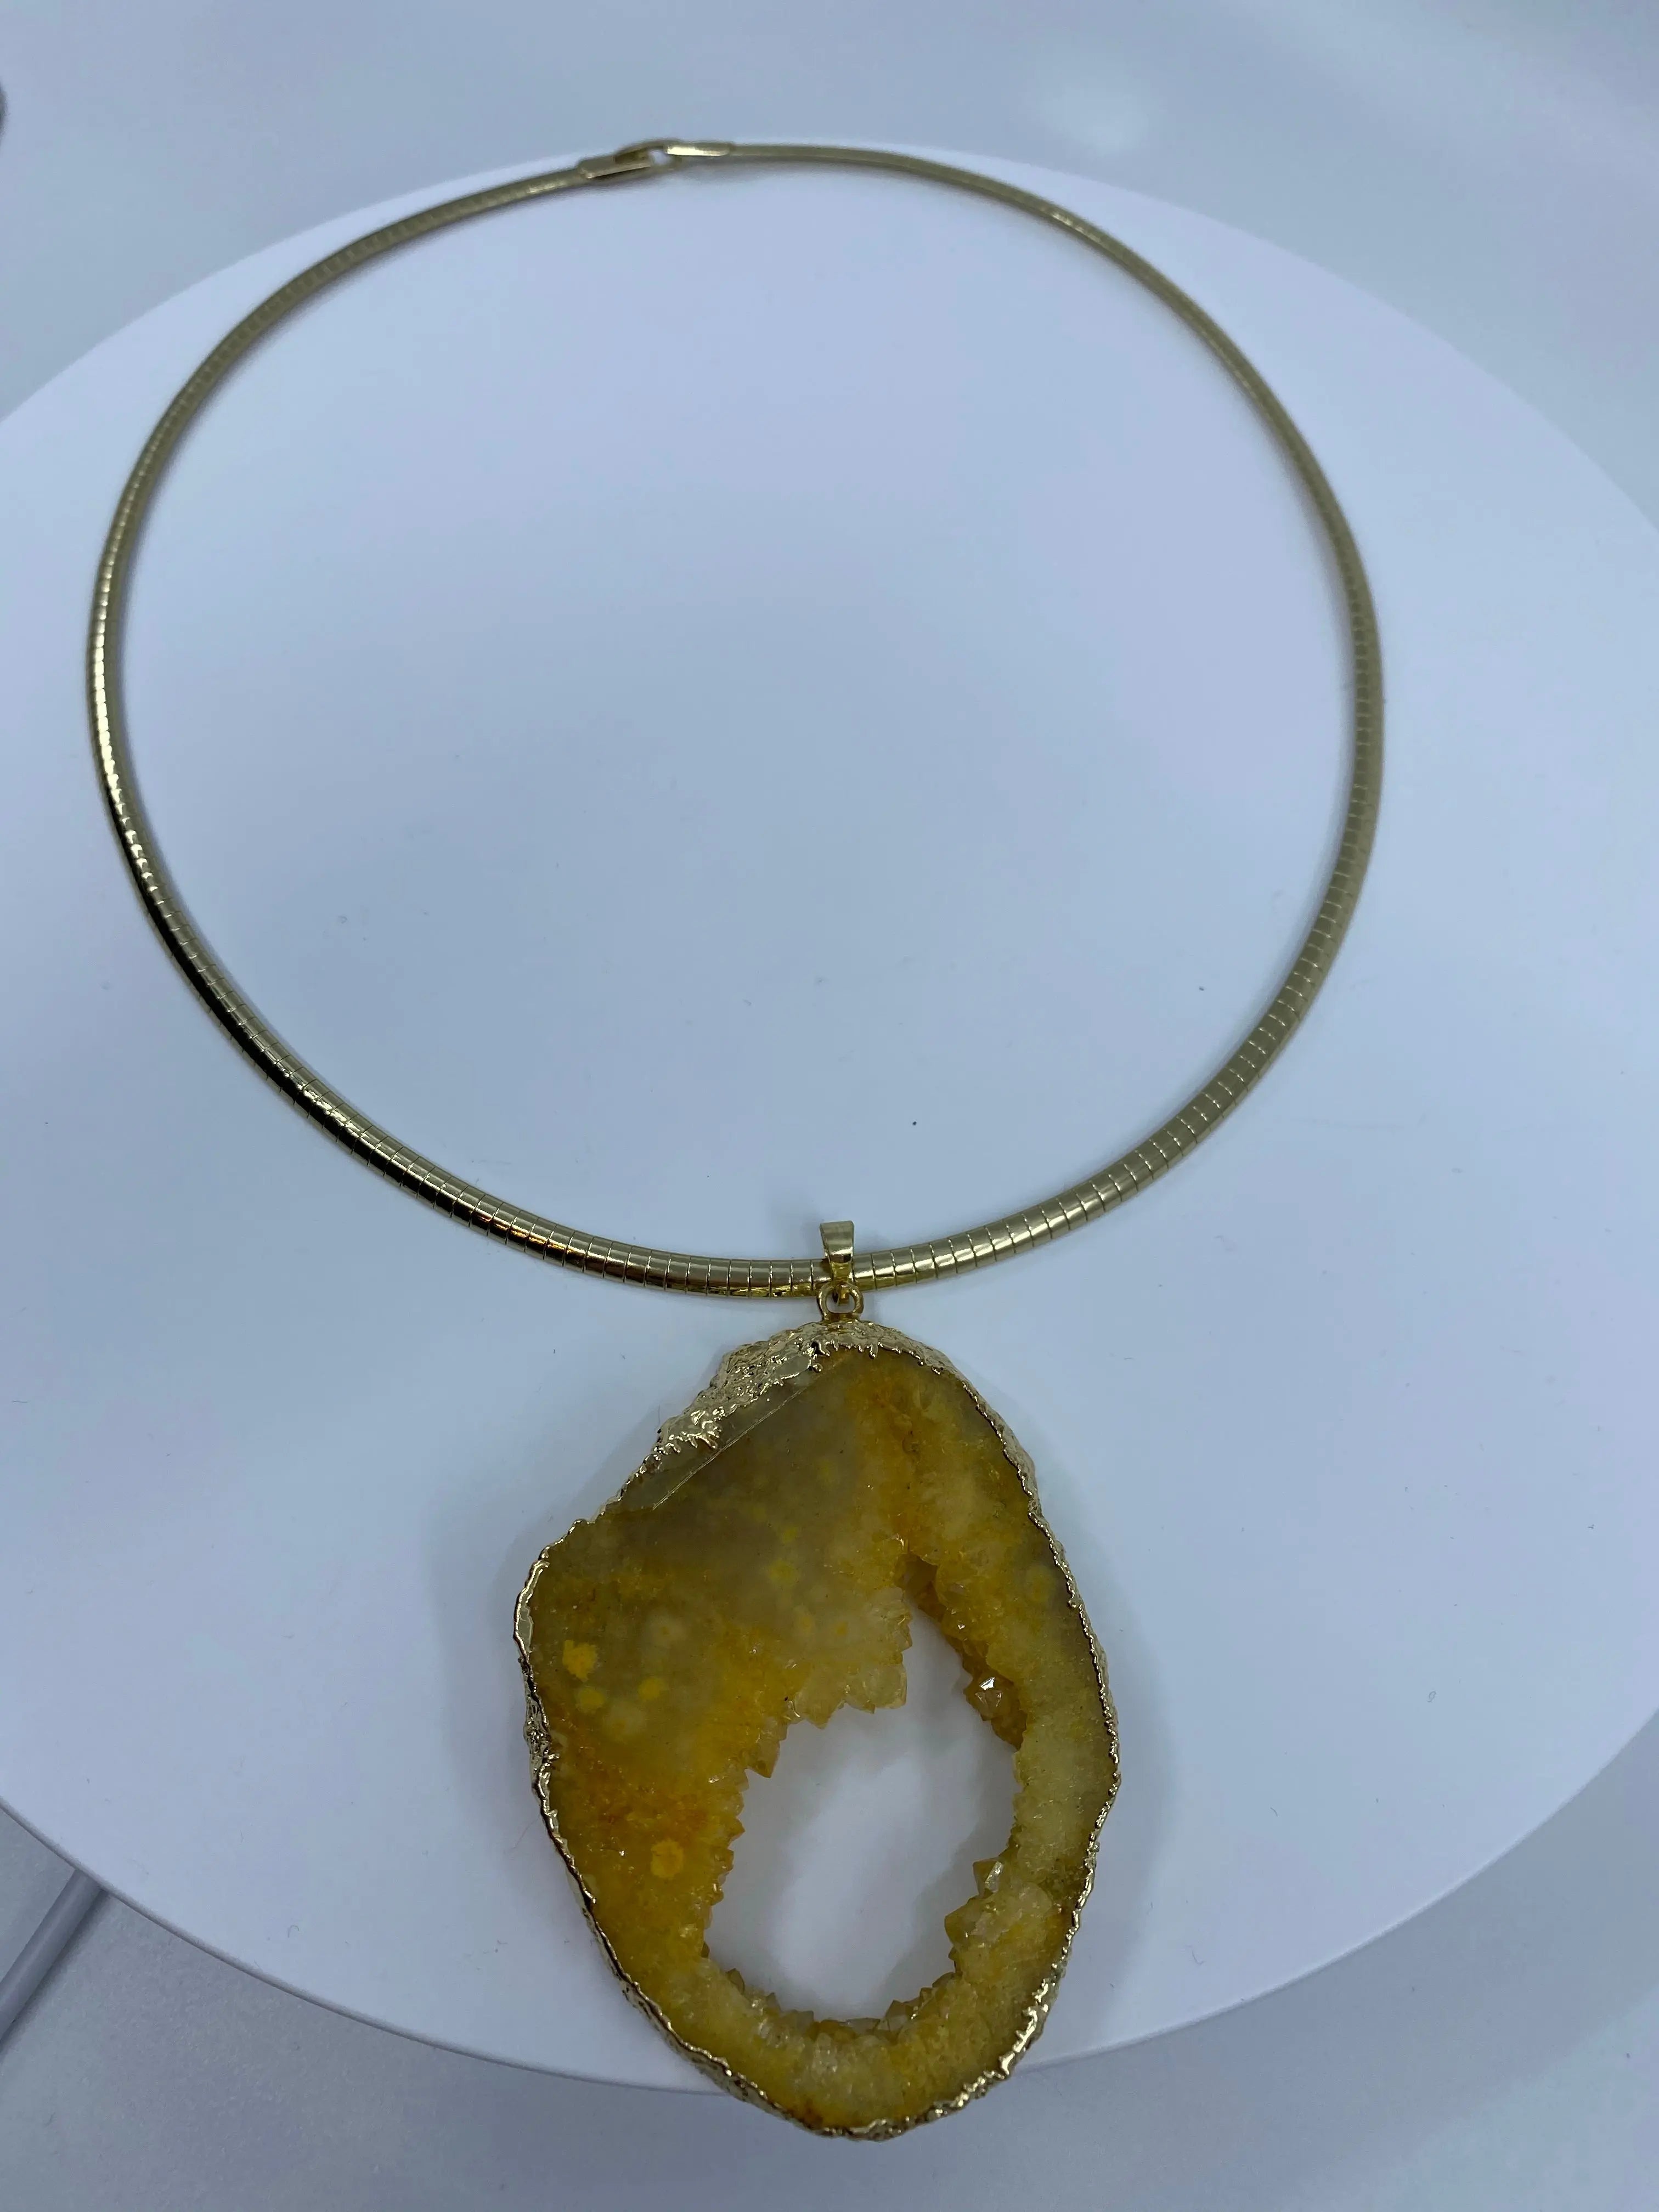 Yellow Druzy pendant with gold chain - EvieRuth Designs Jewelry